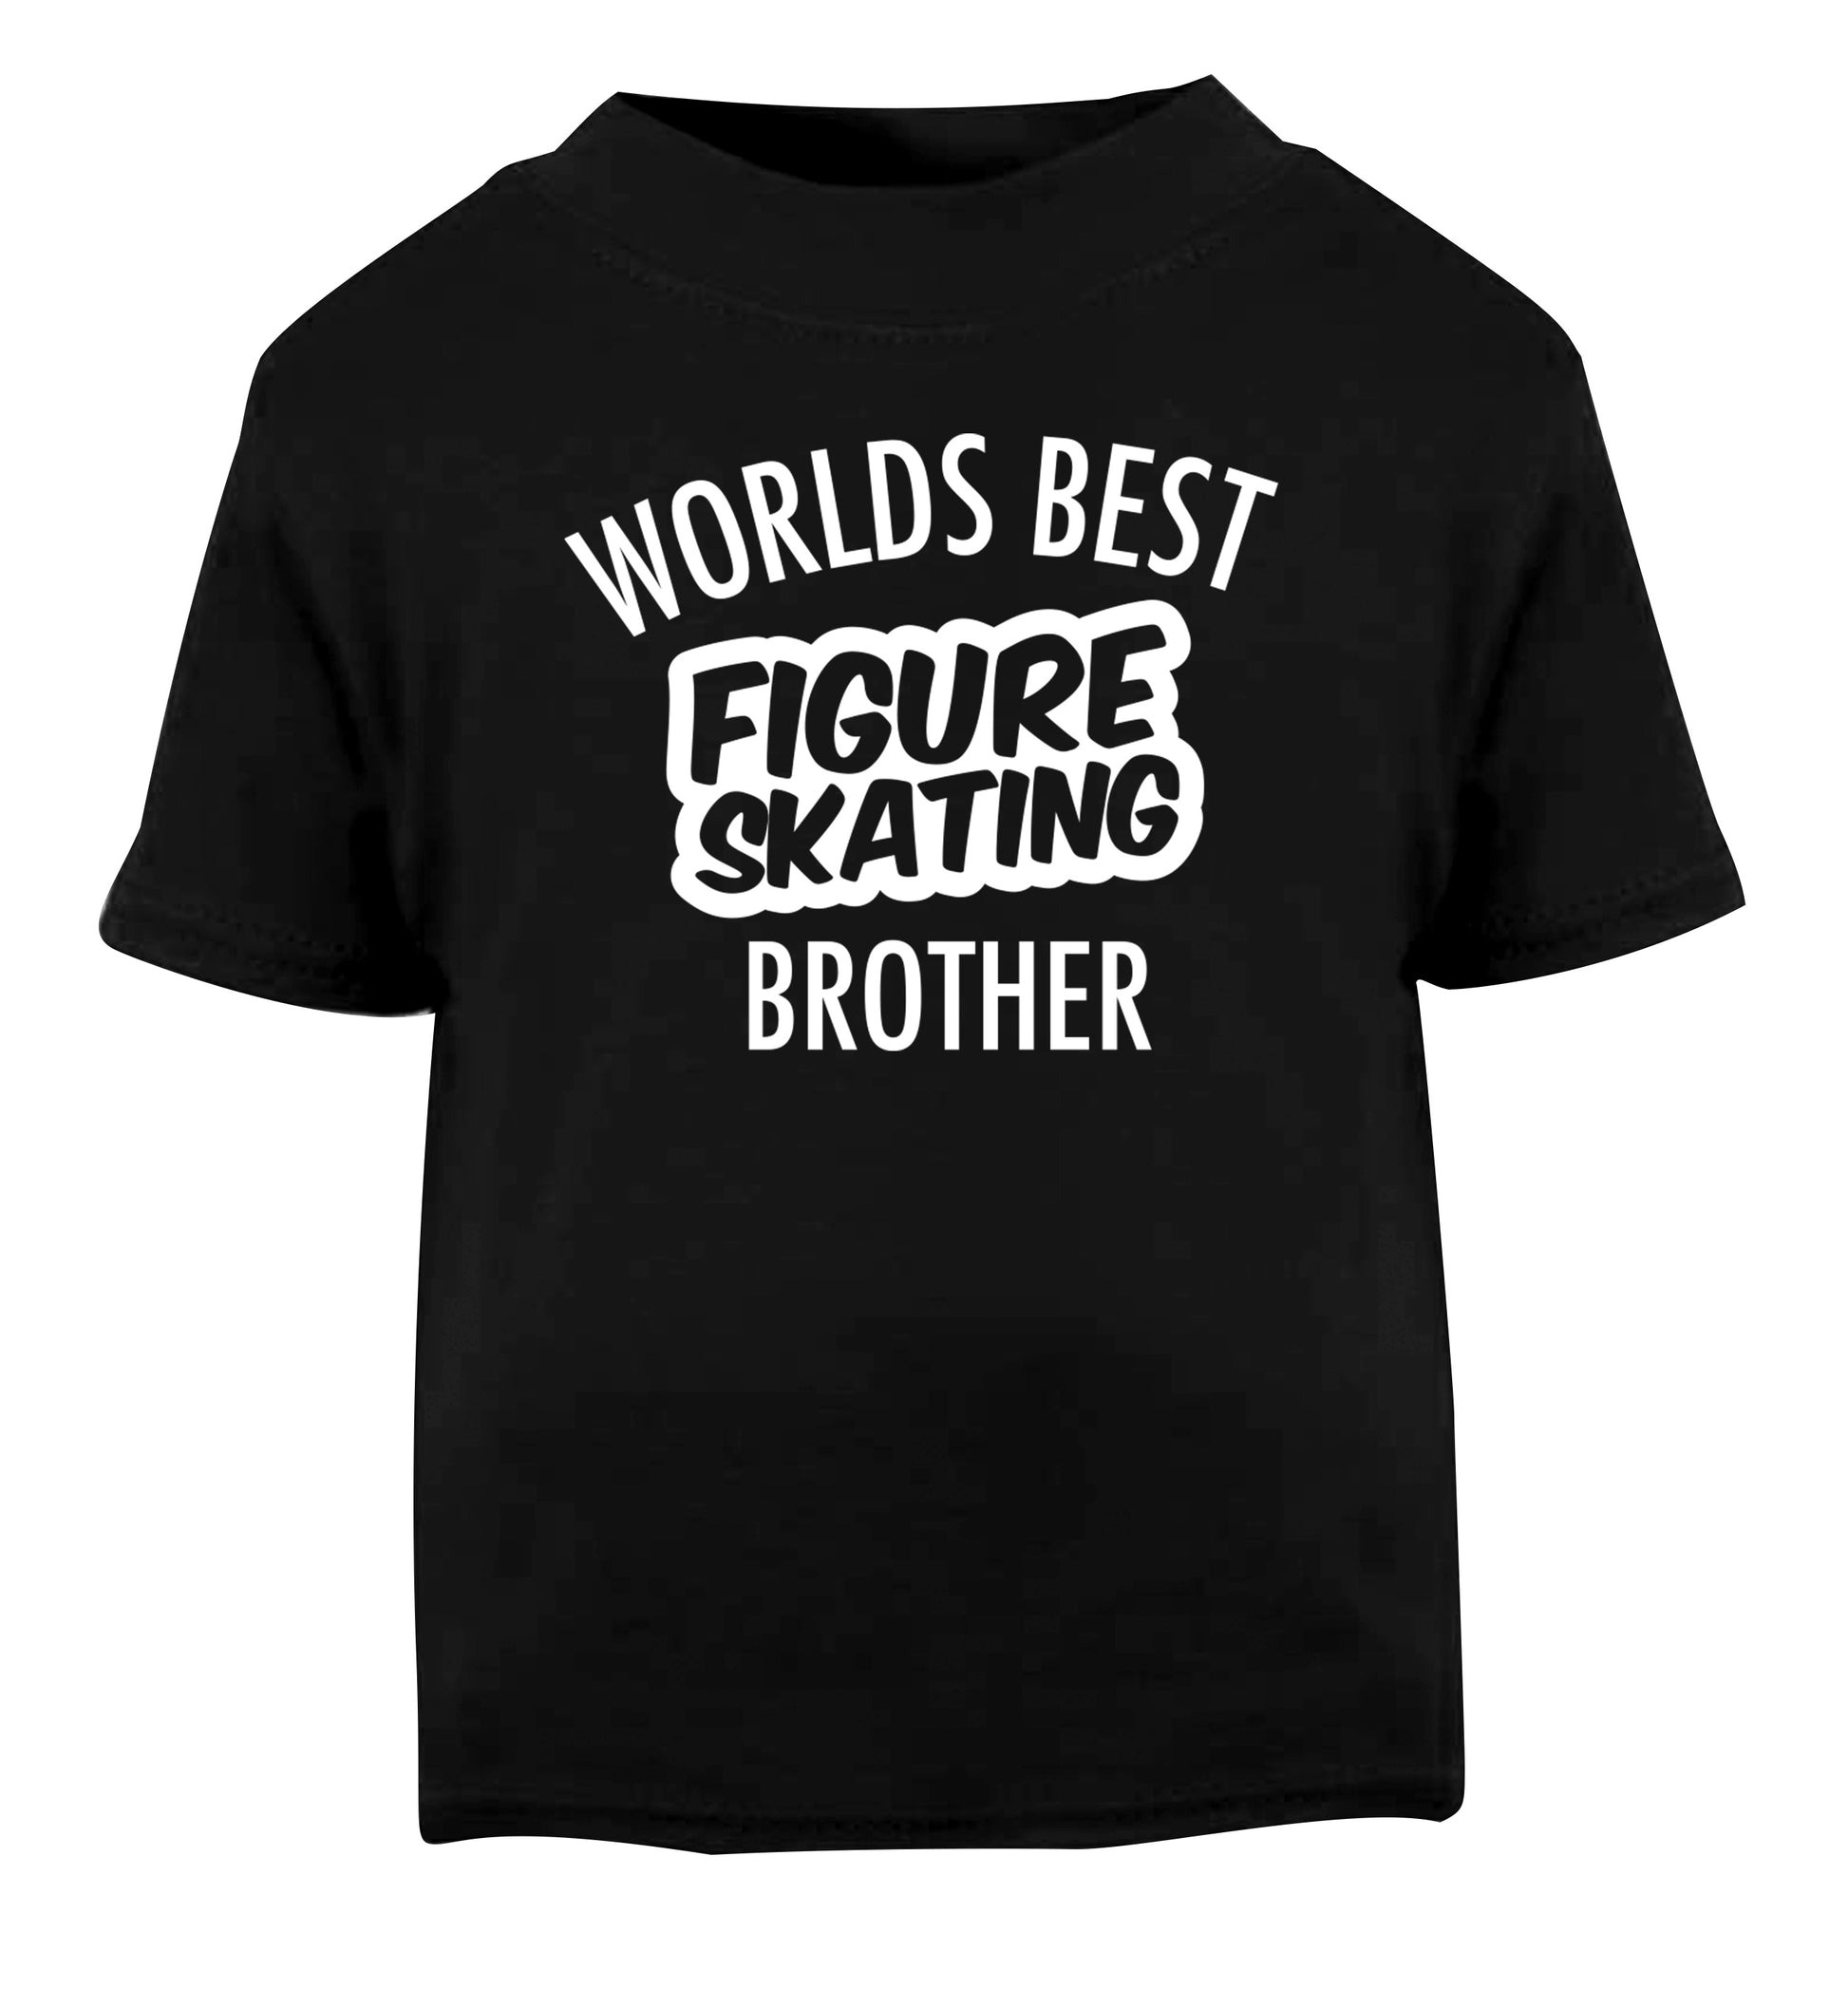 Worlds best figure skating brother Black Baby Toddler Tshirt 2 years